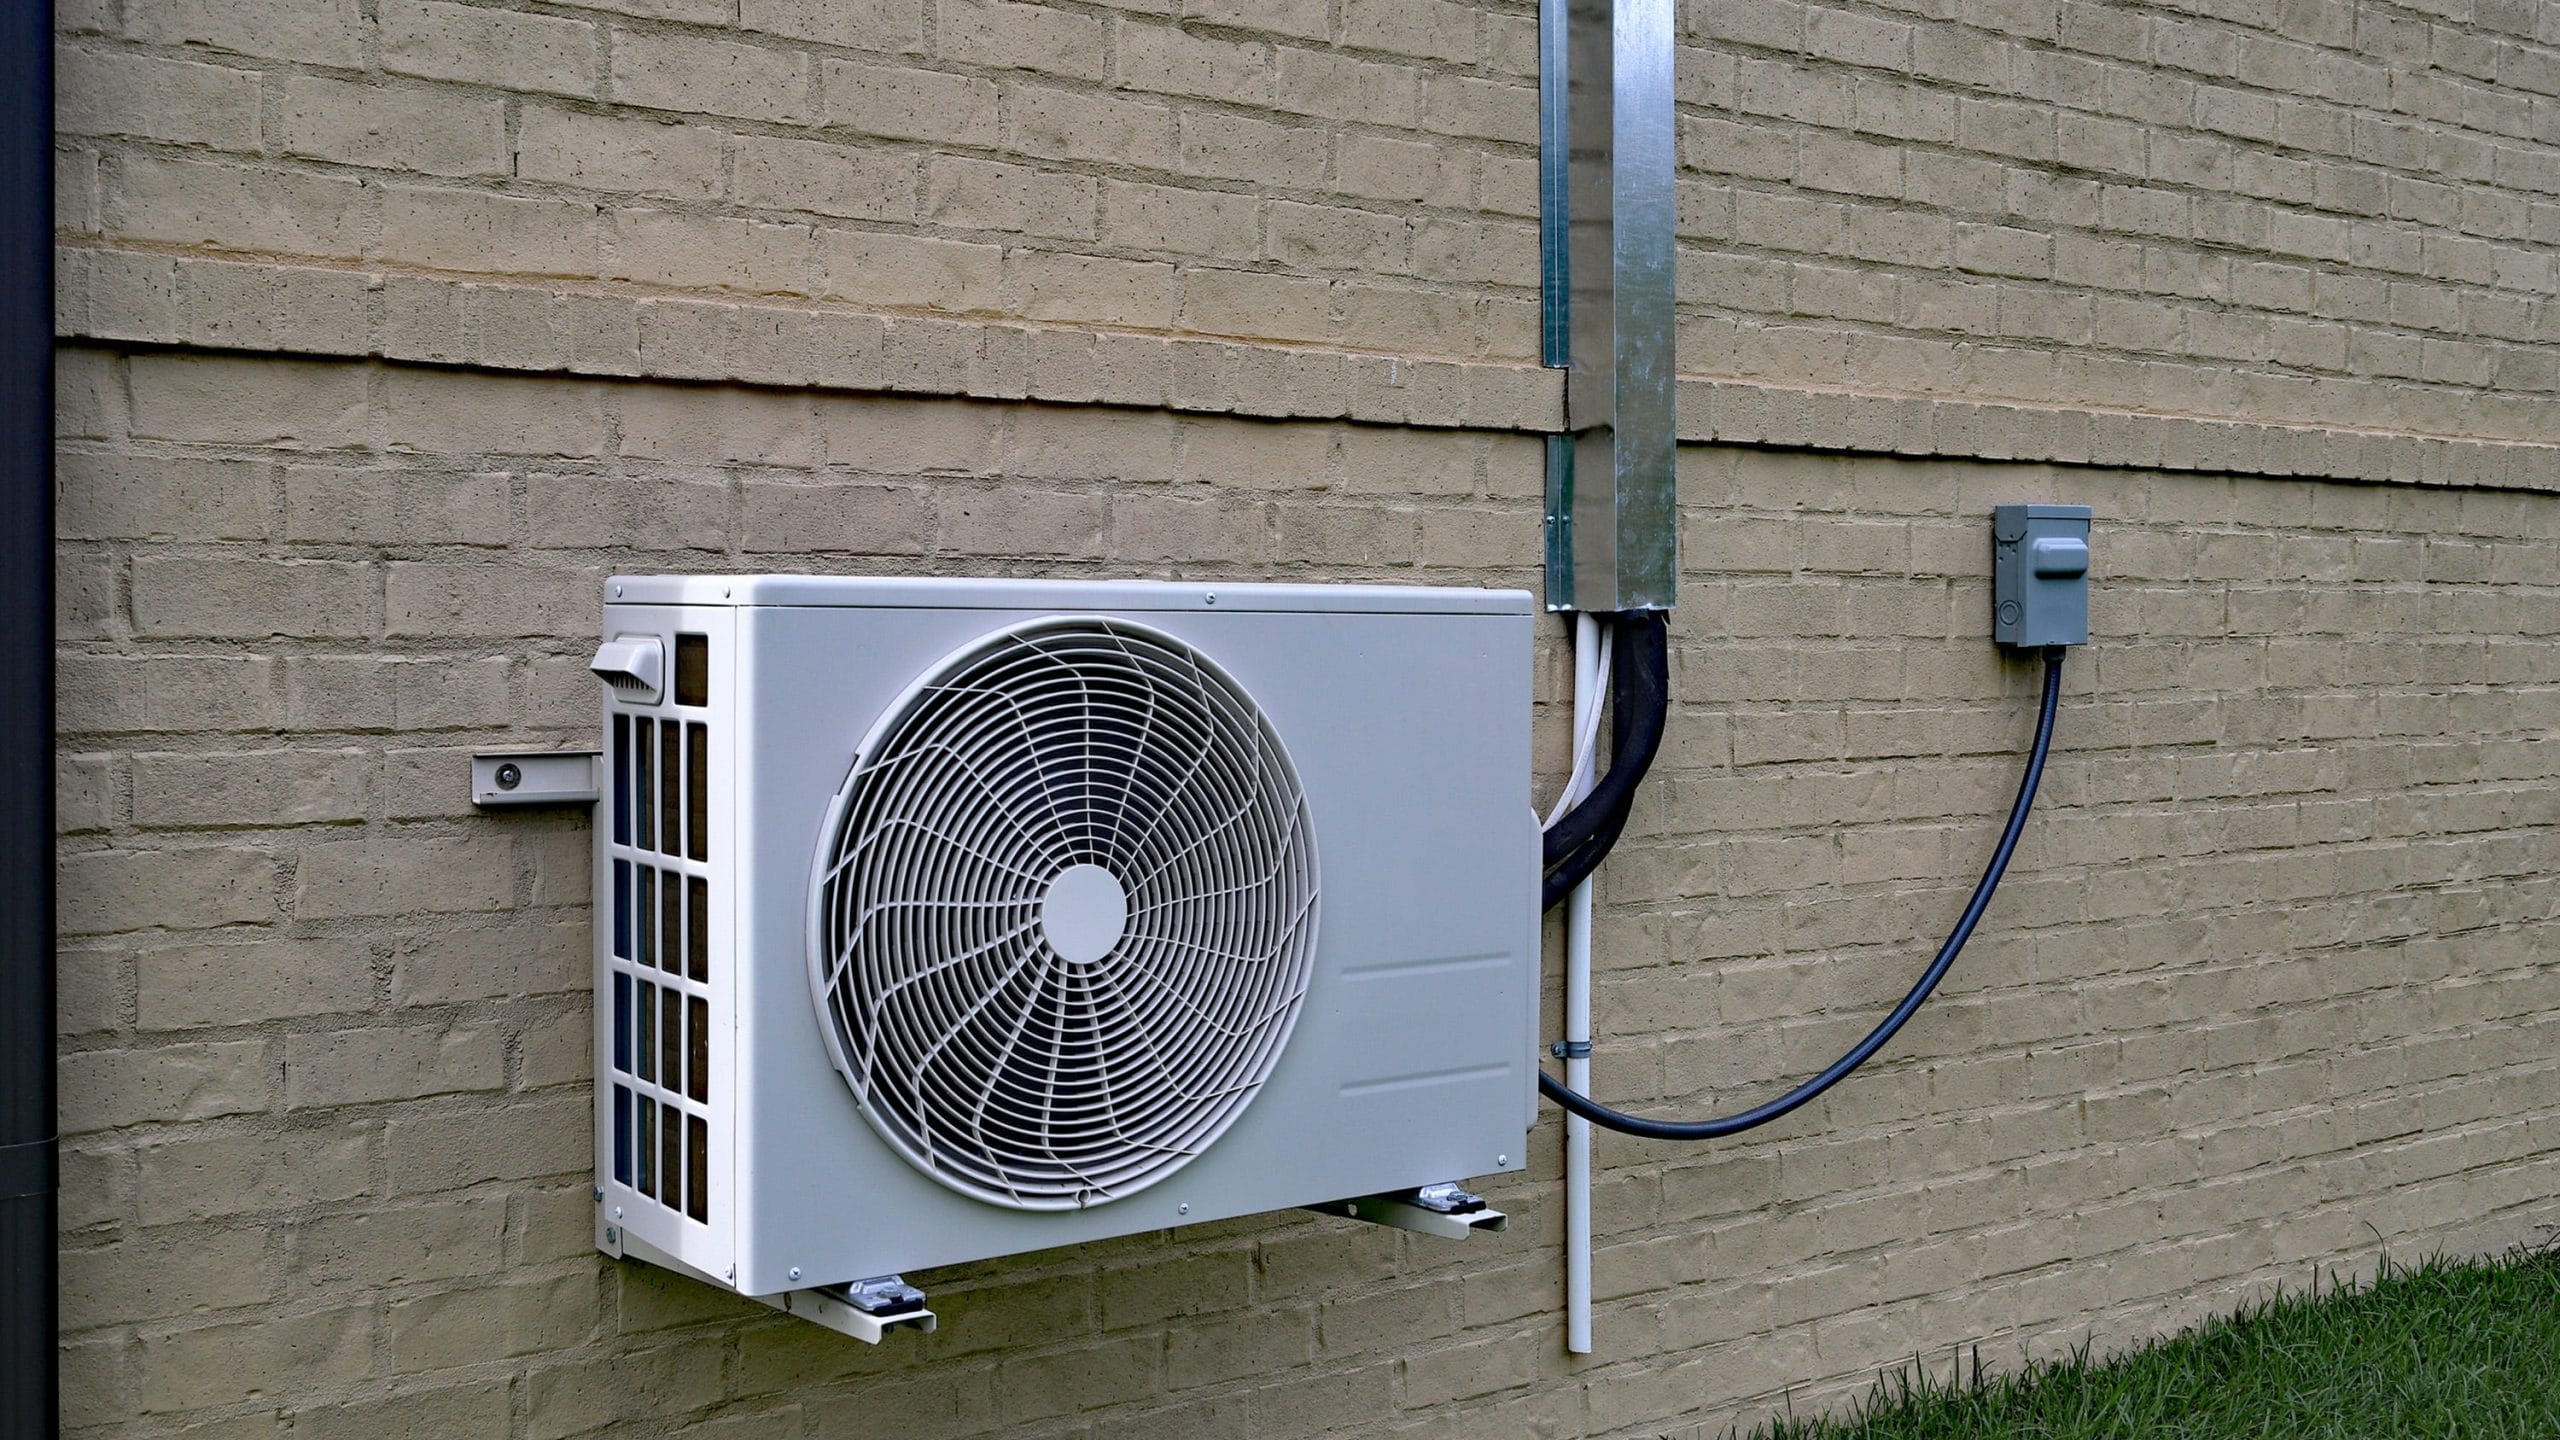 Ductless mini split air conditioner in Mississauga, ON